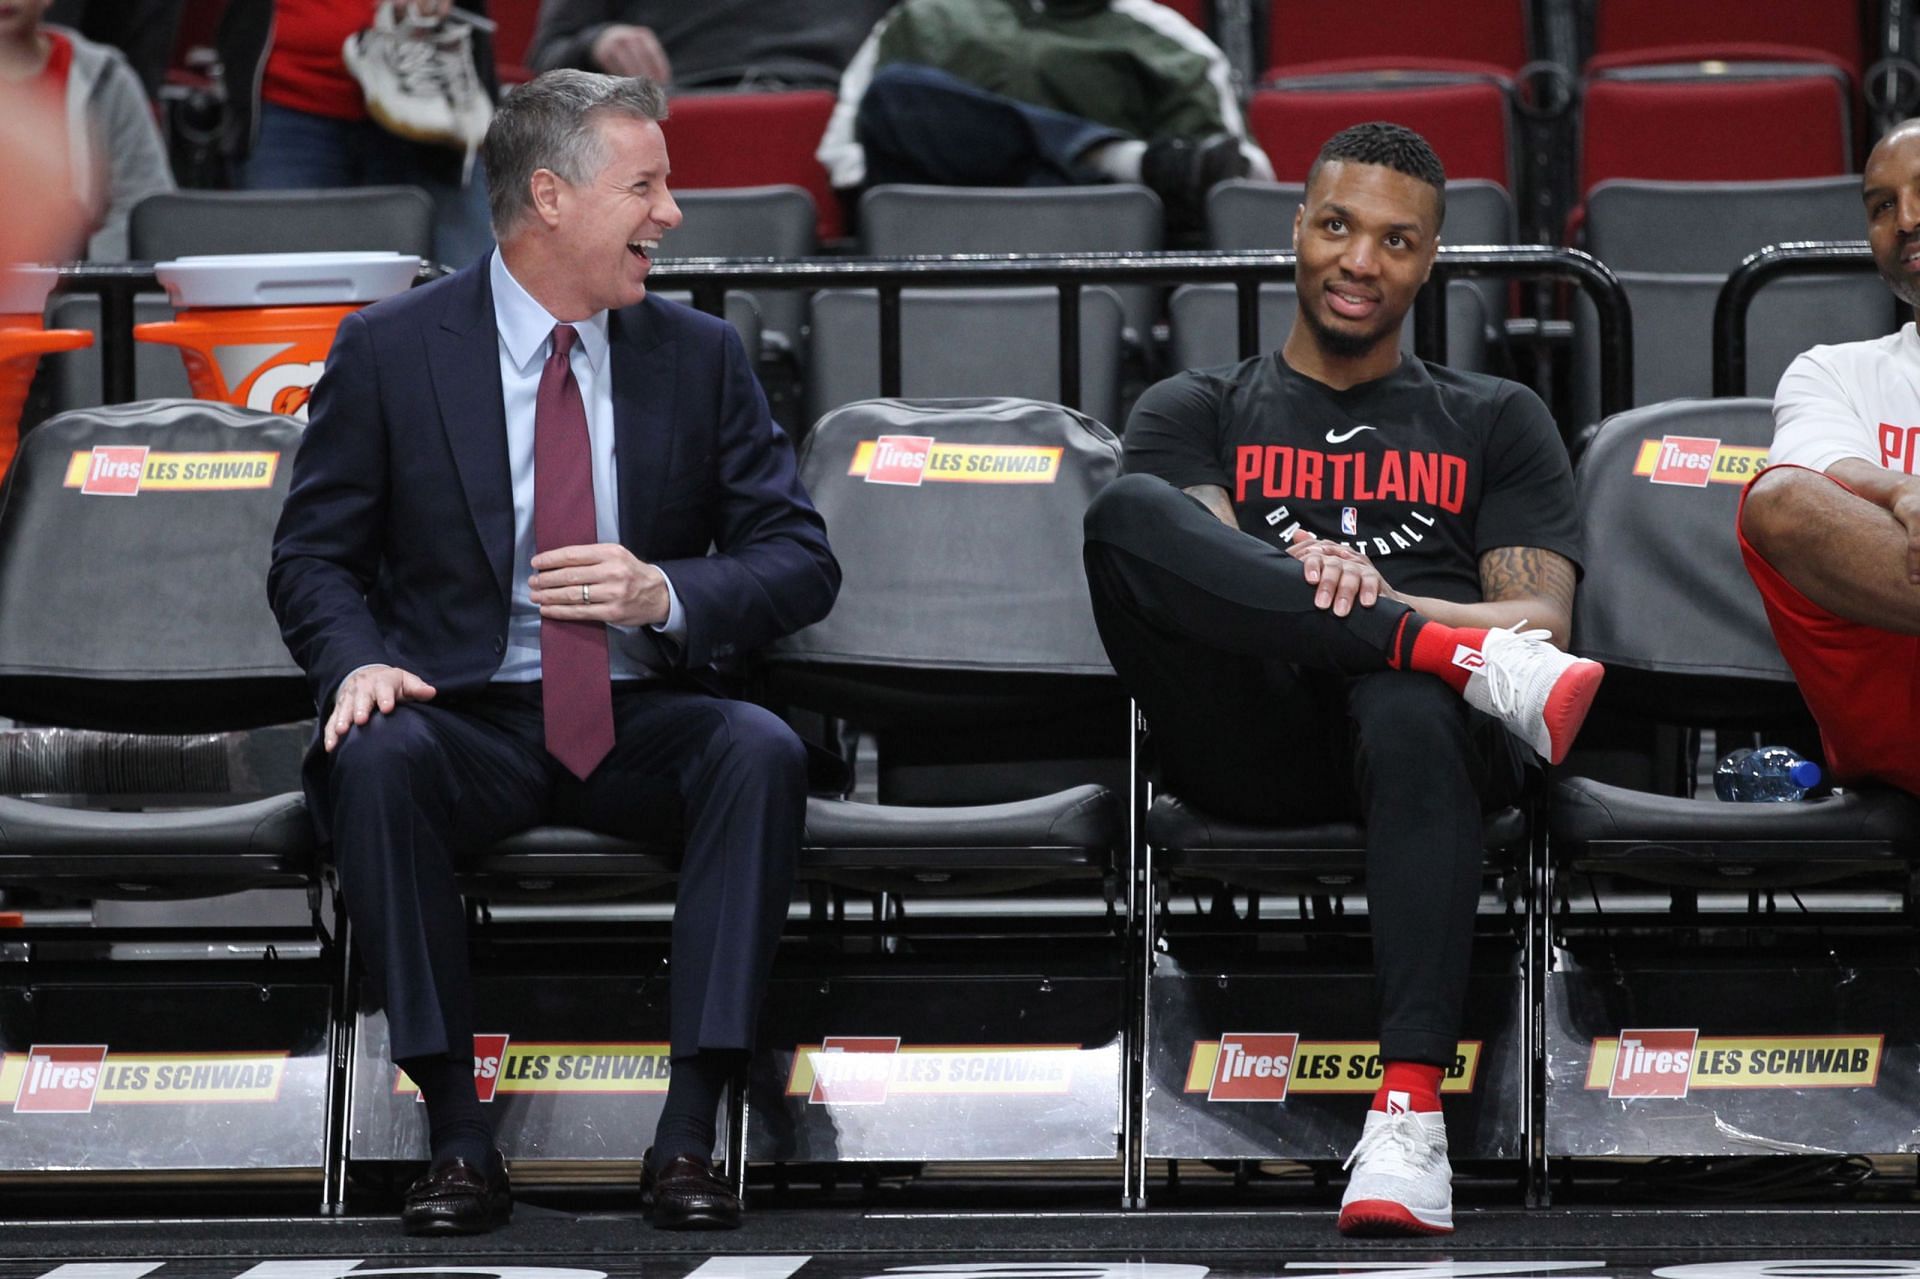 President of Basketball Operations Neil Olshey drafted franchise player Damian Lillard to the Portland Trail Blazers in 2012 [Photo: Rip City Project]